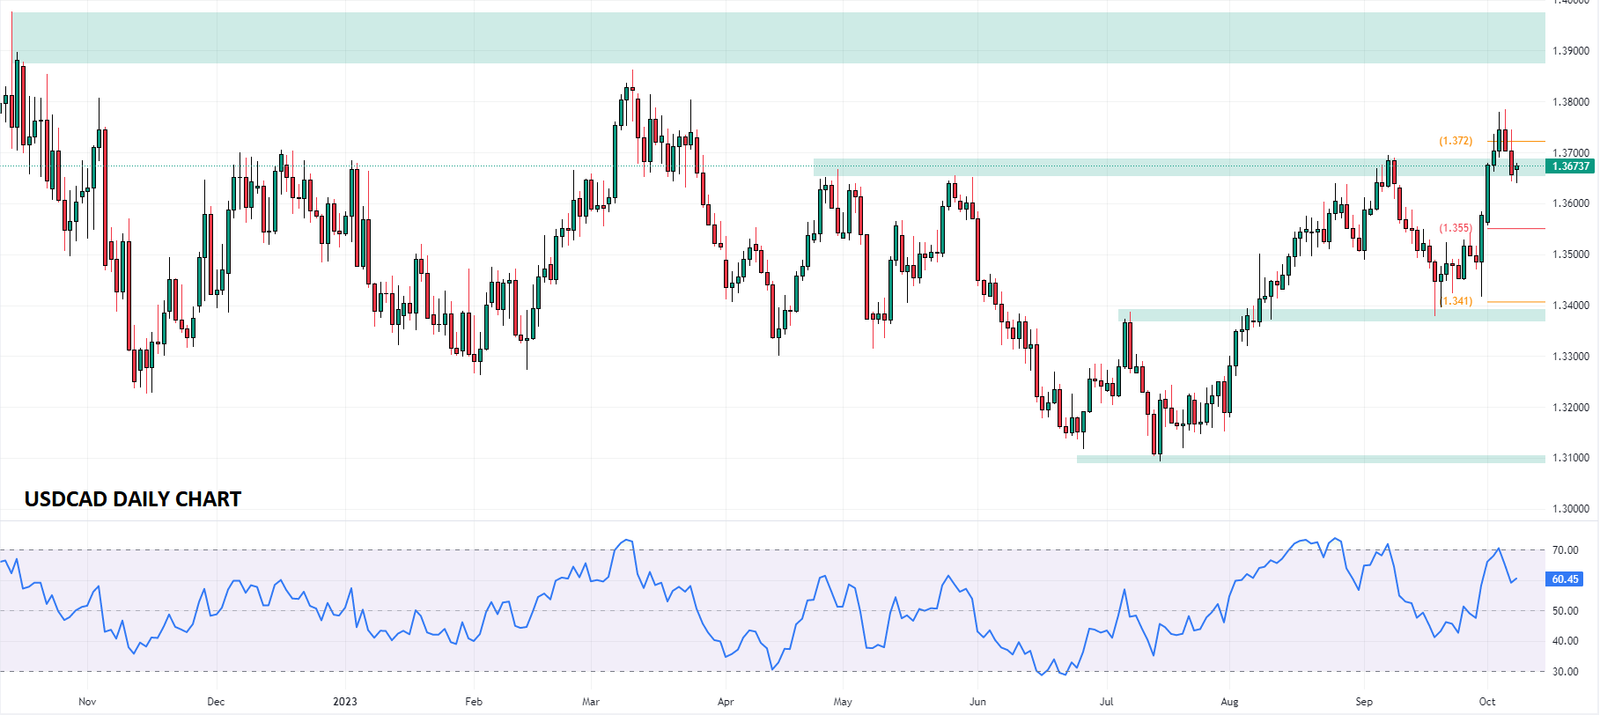 USDCAD Technical Analysis - Bulls Key Support